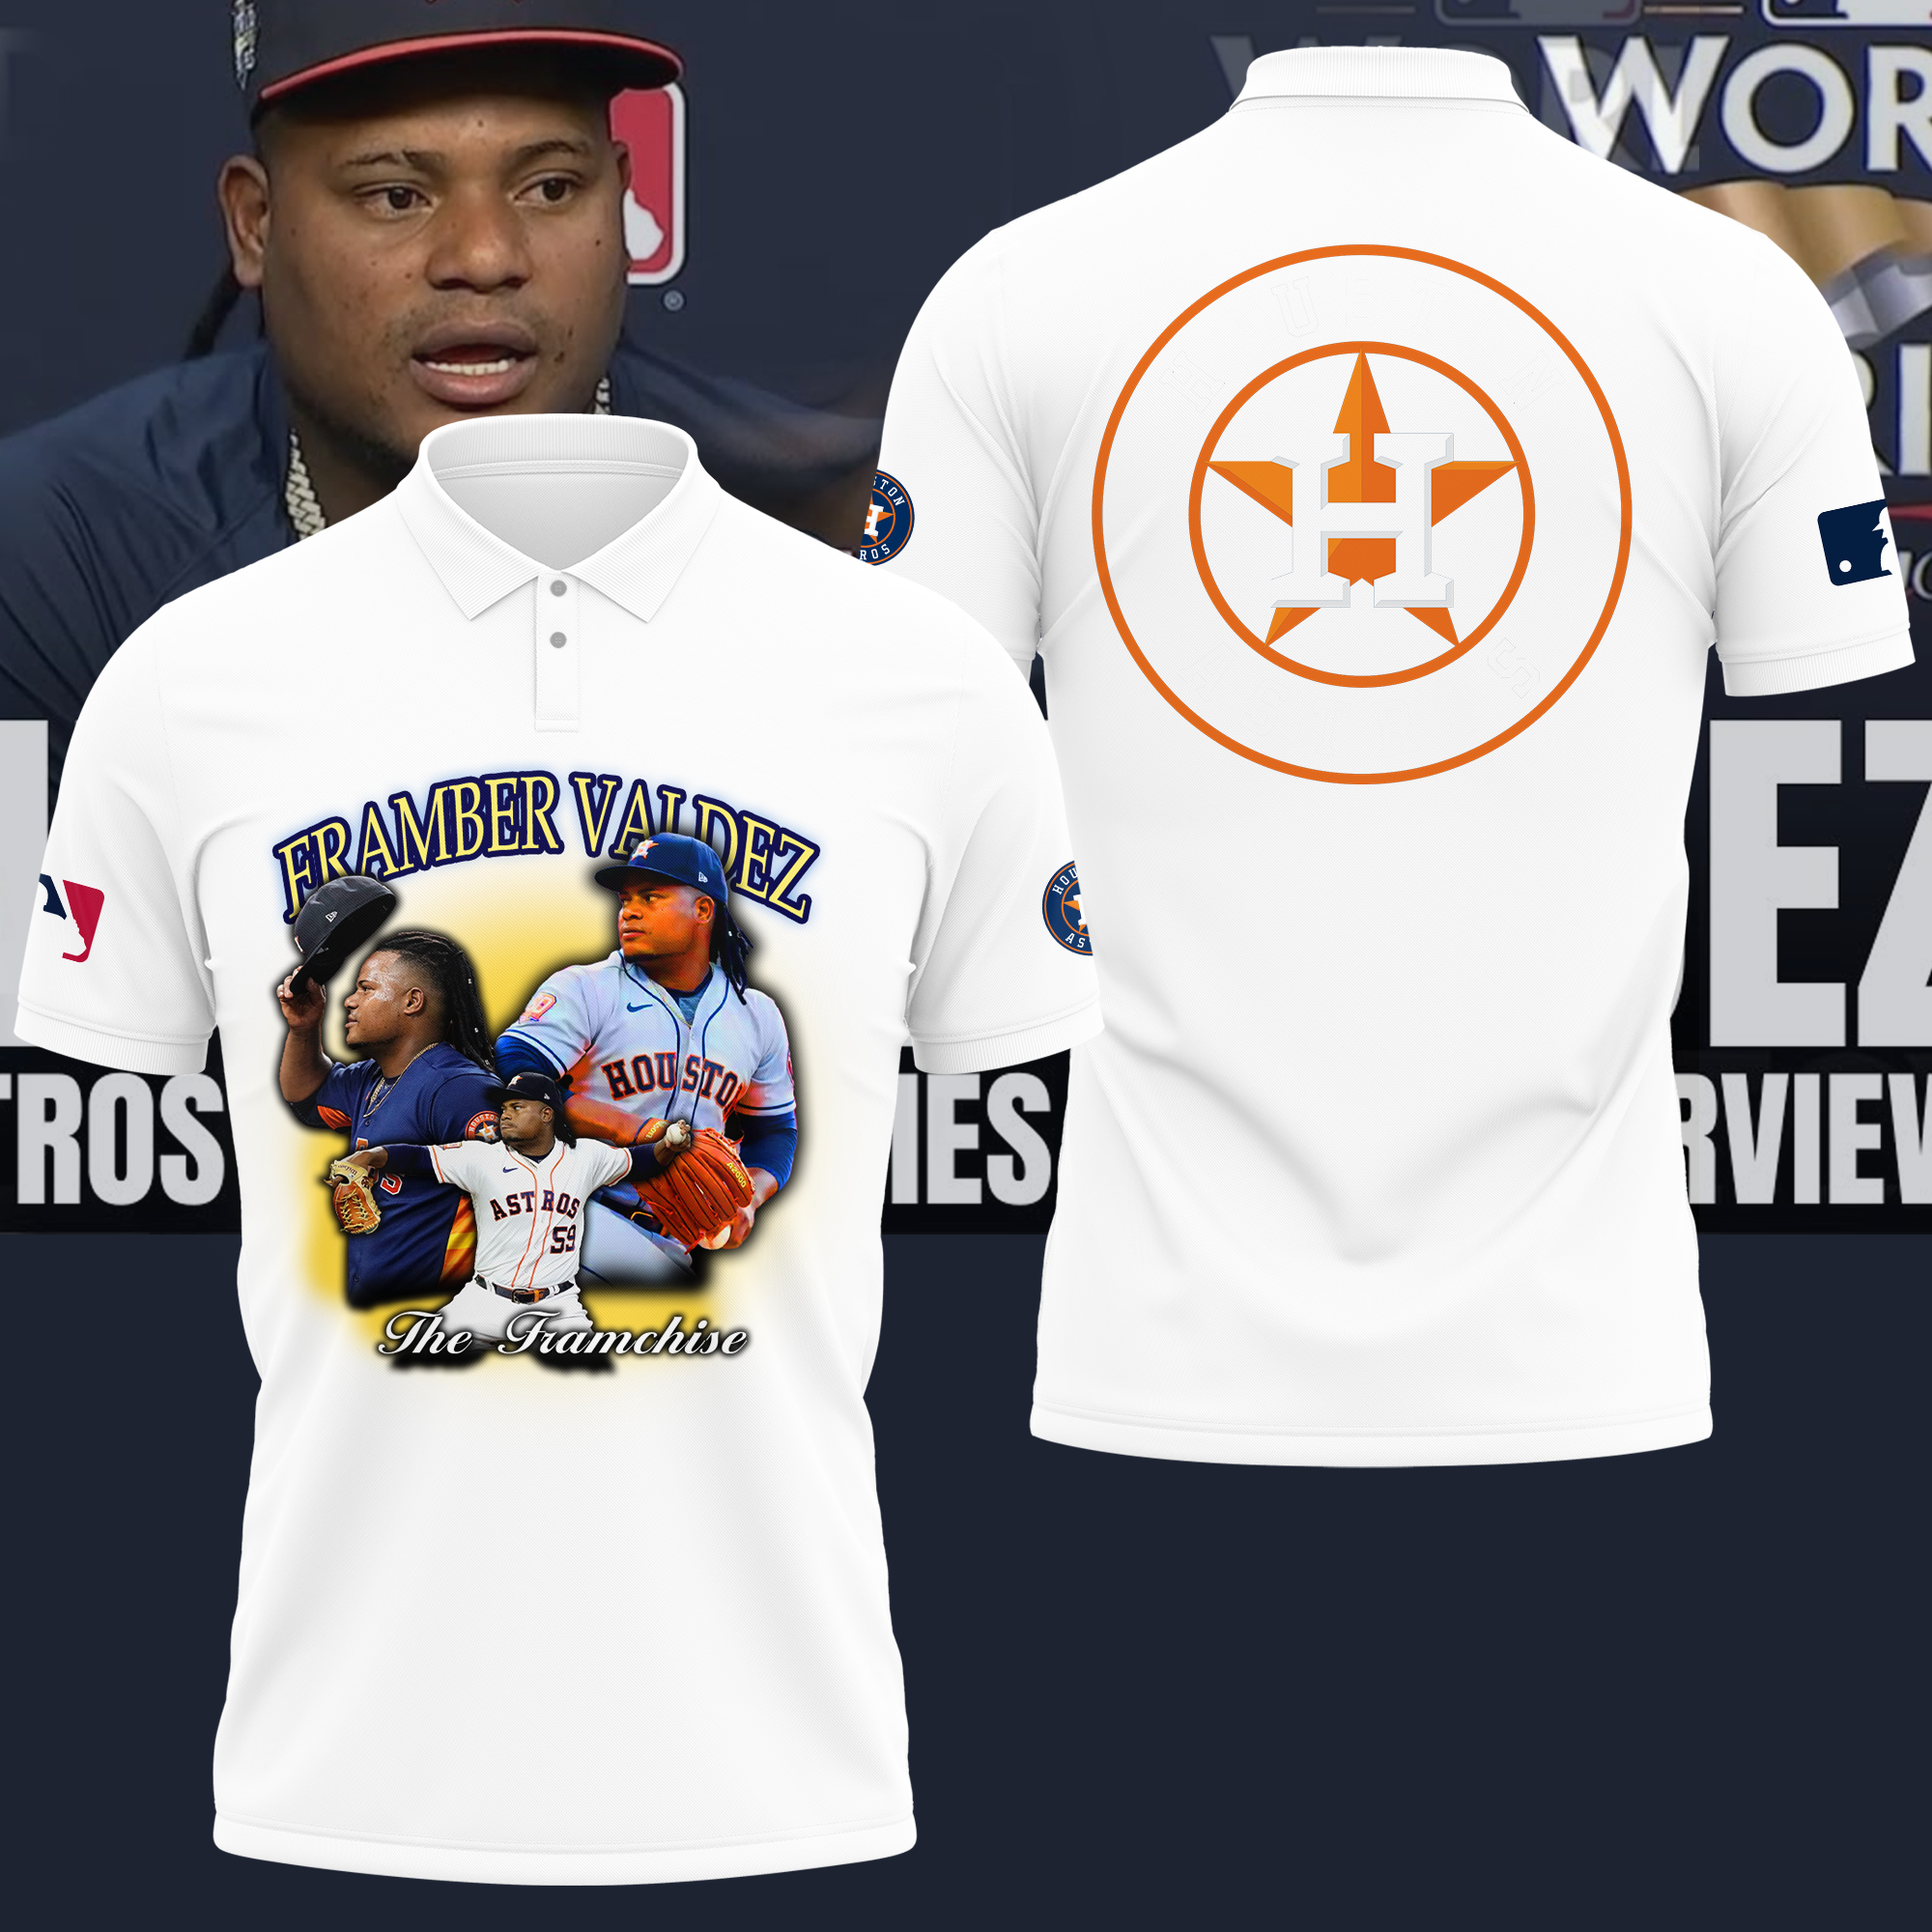 Houston Astros All-Star Game MLB Jerseys for sale